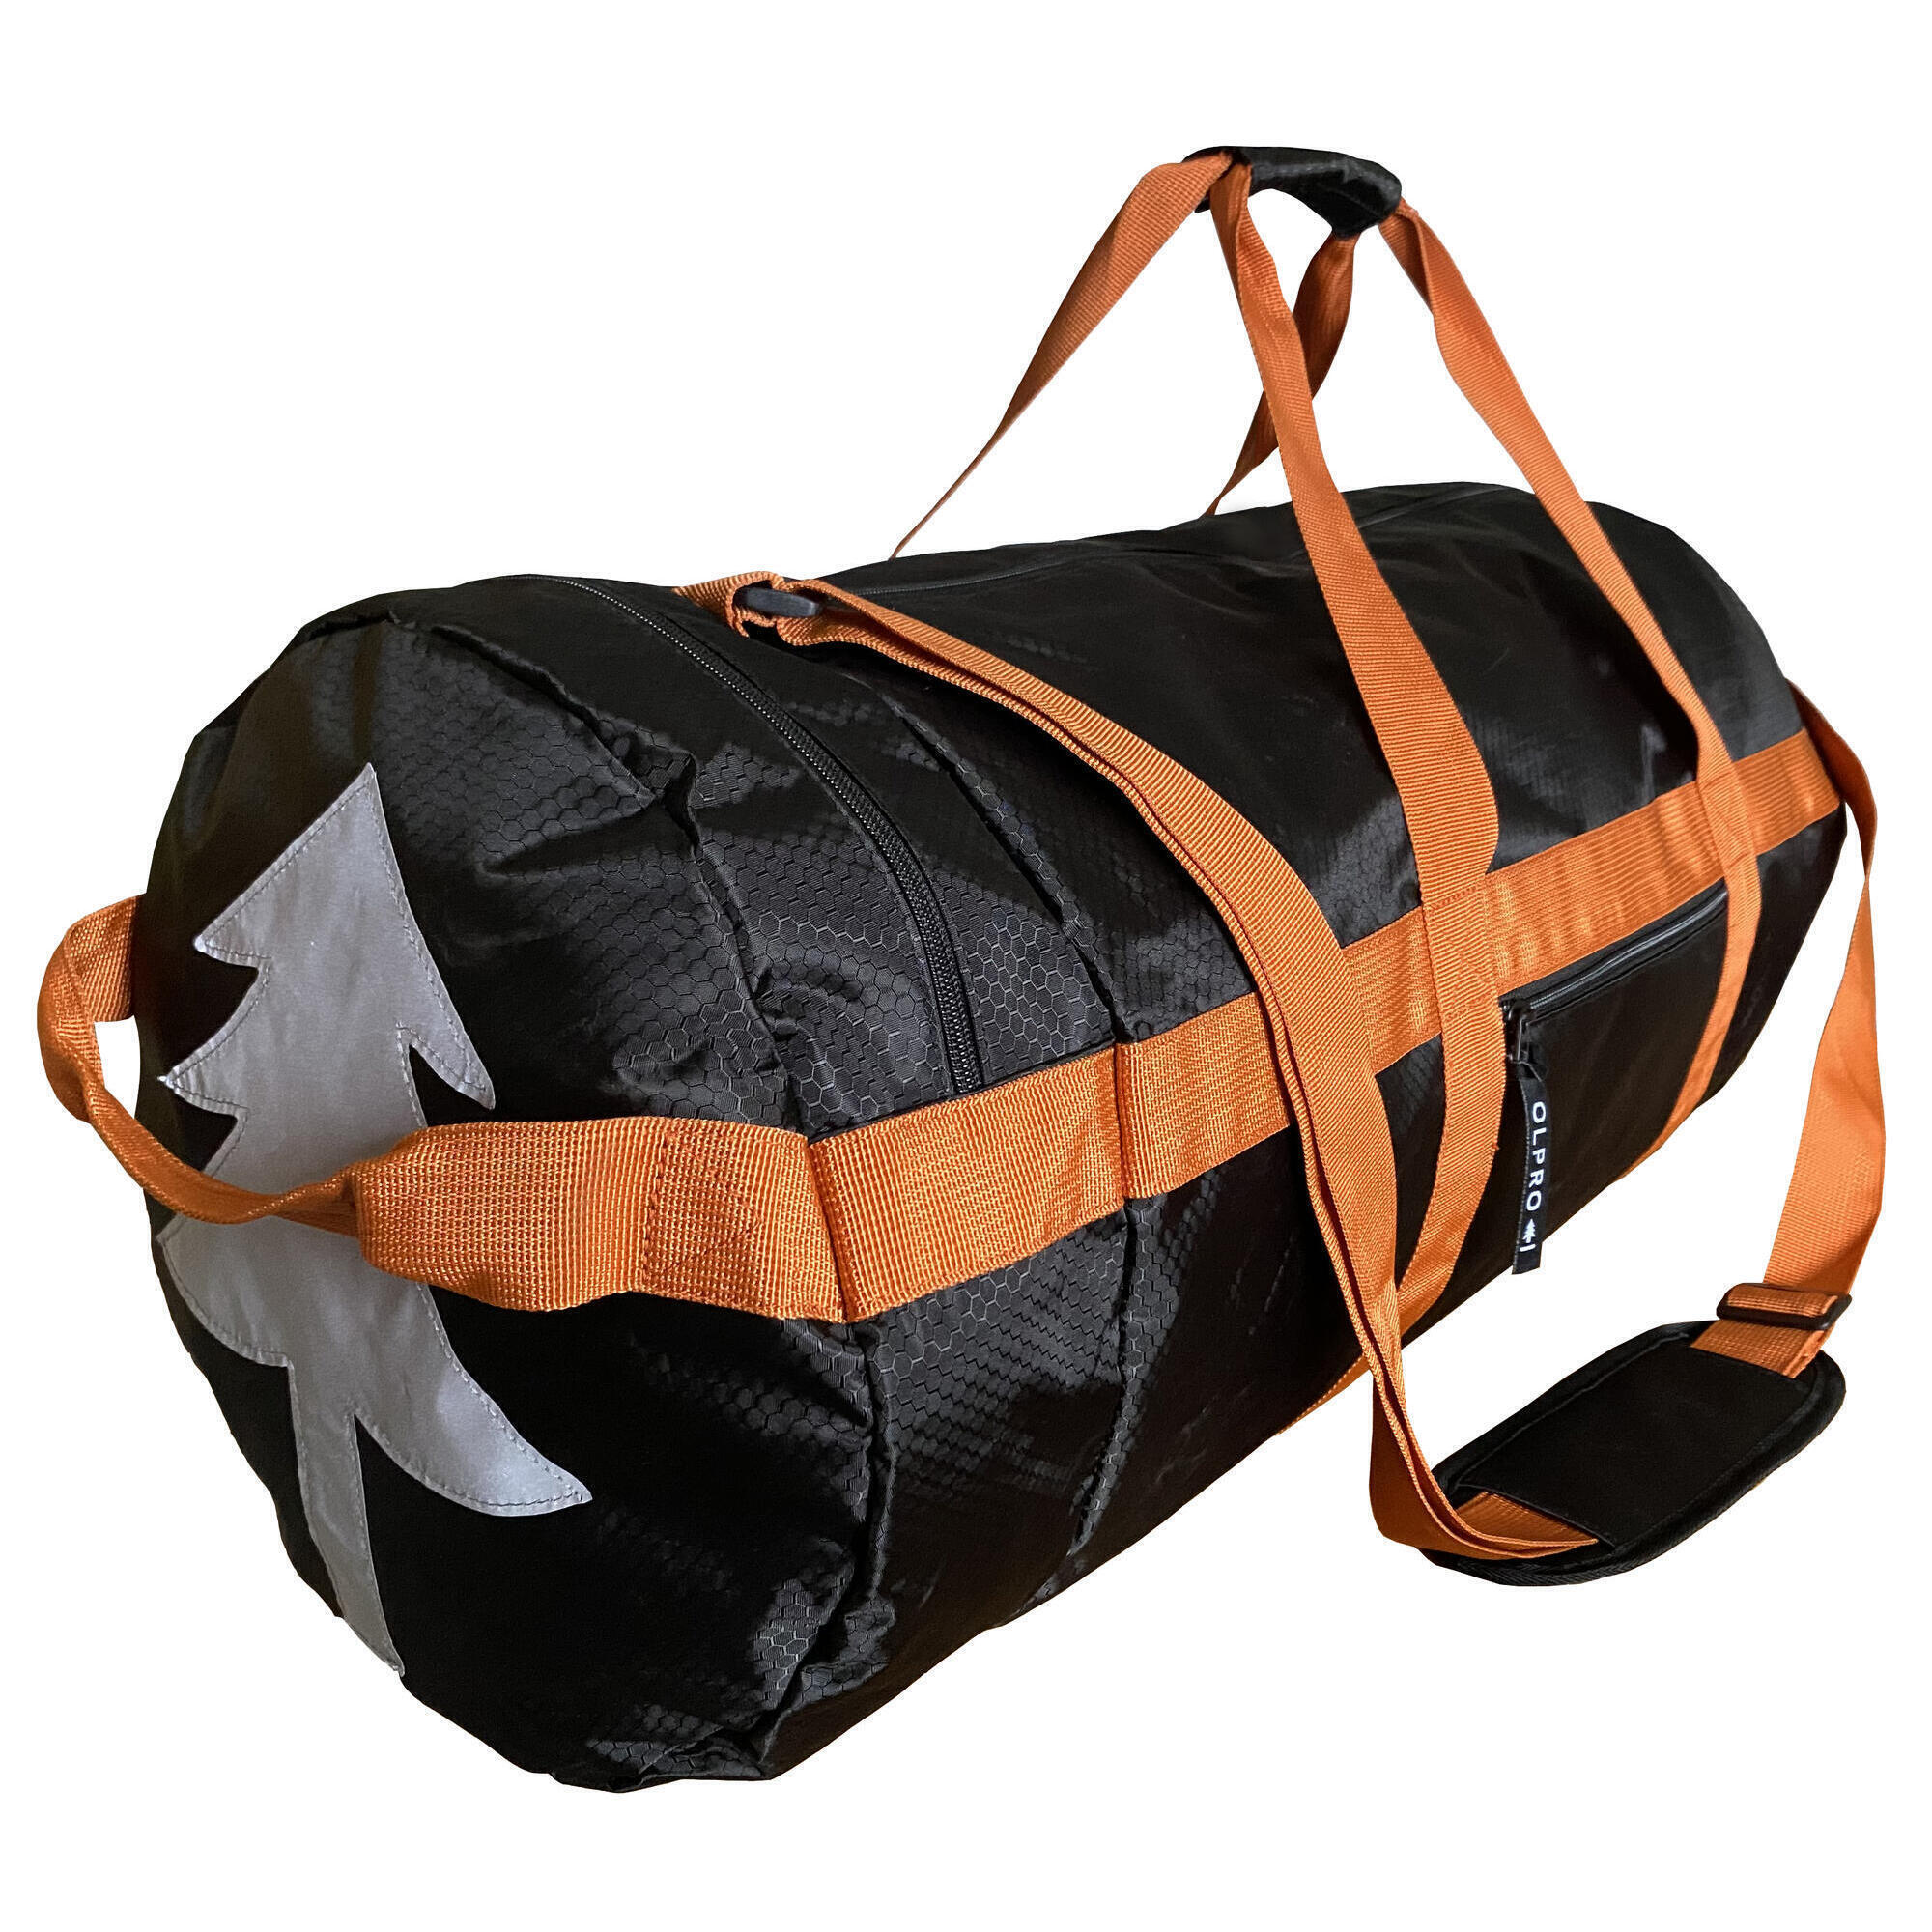 OLPRO OLPRO 60L Holdall/Duffle Bag